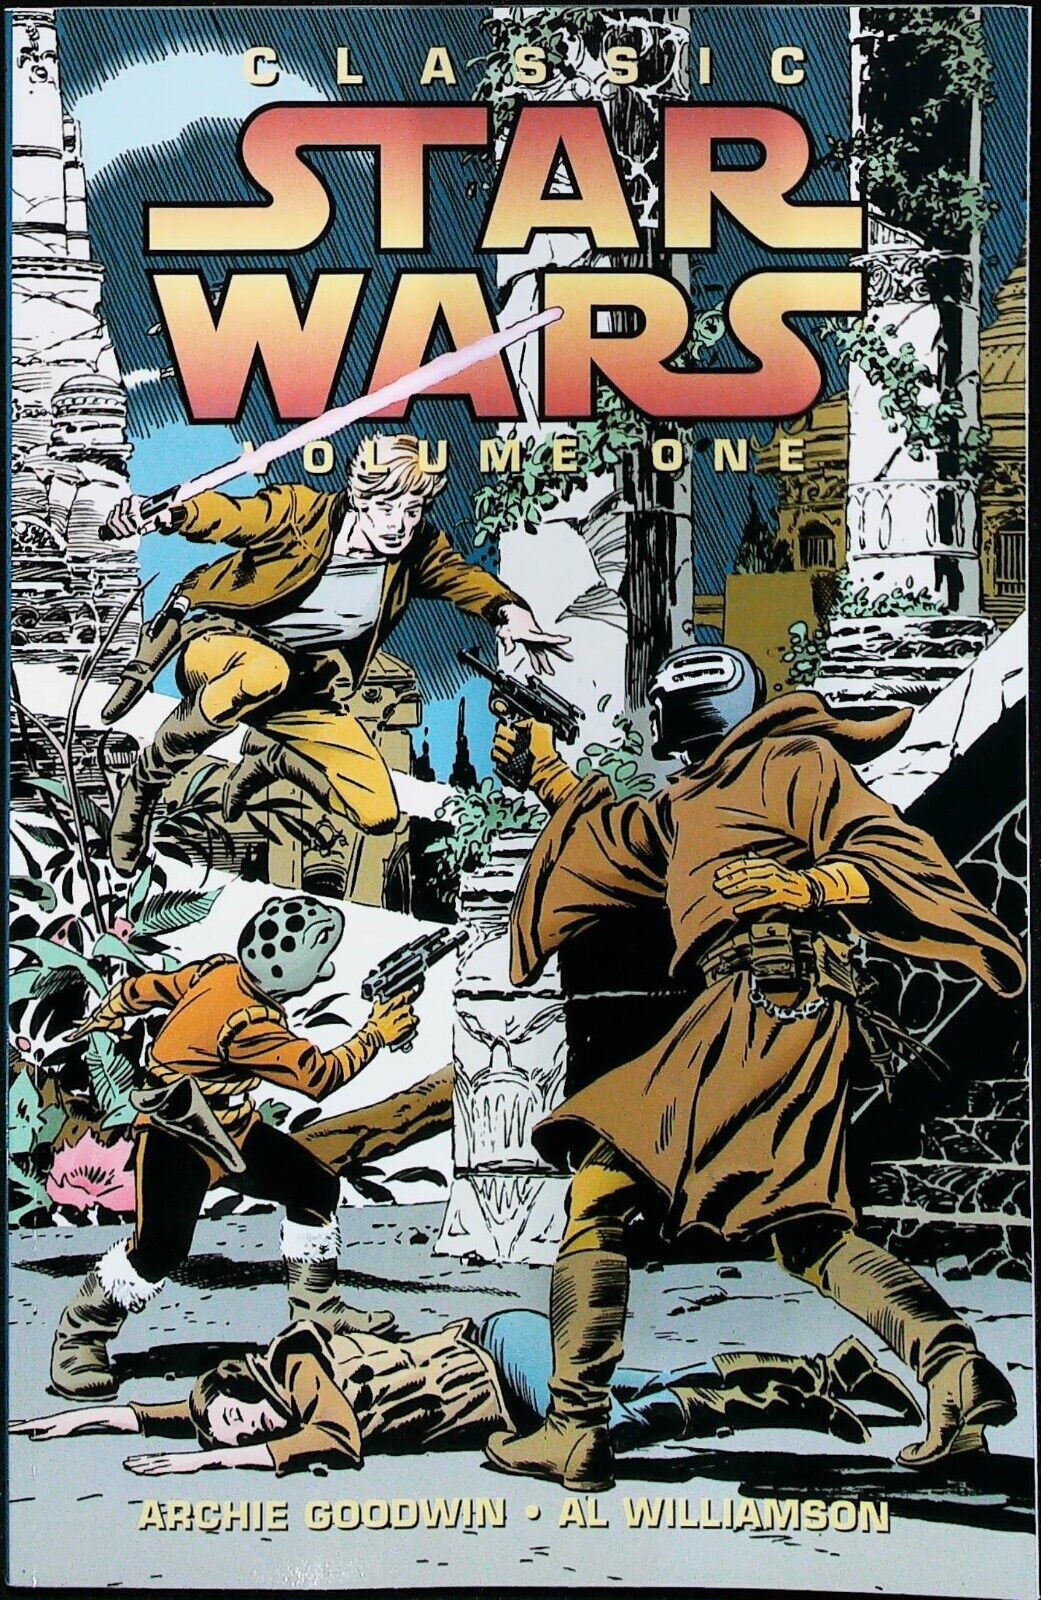 Classic Star Wars Volume One  (1994) - Trade Paper Back